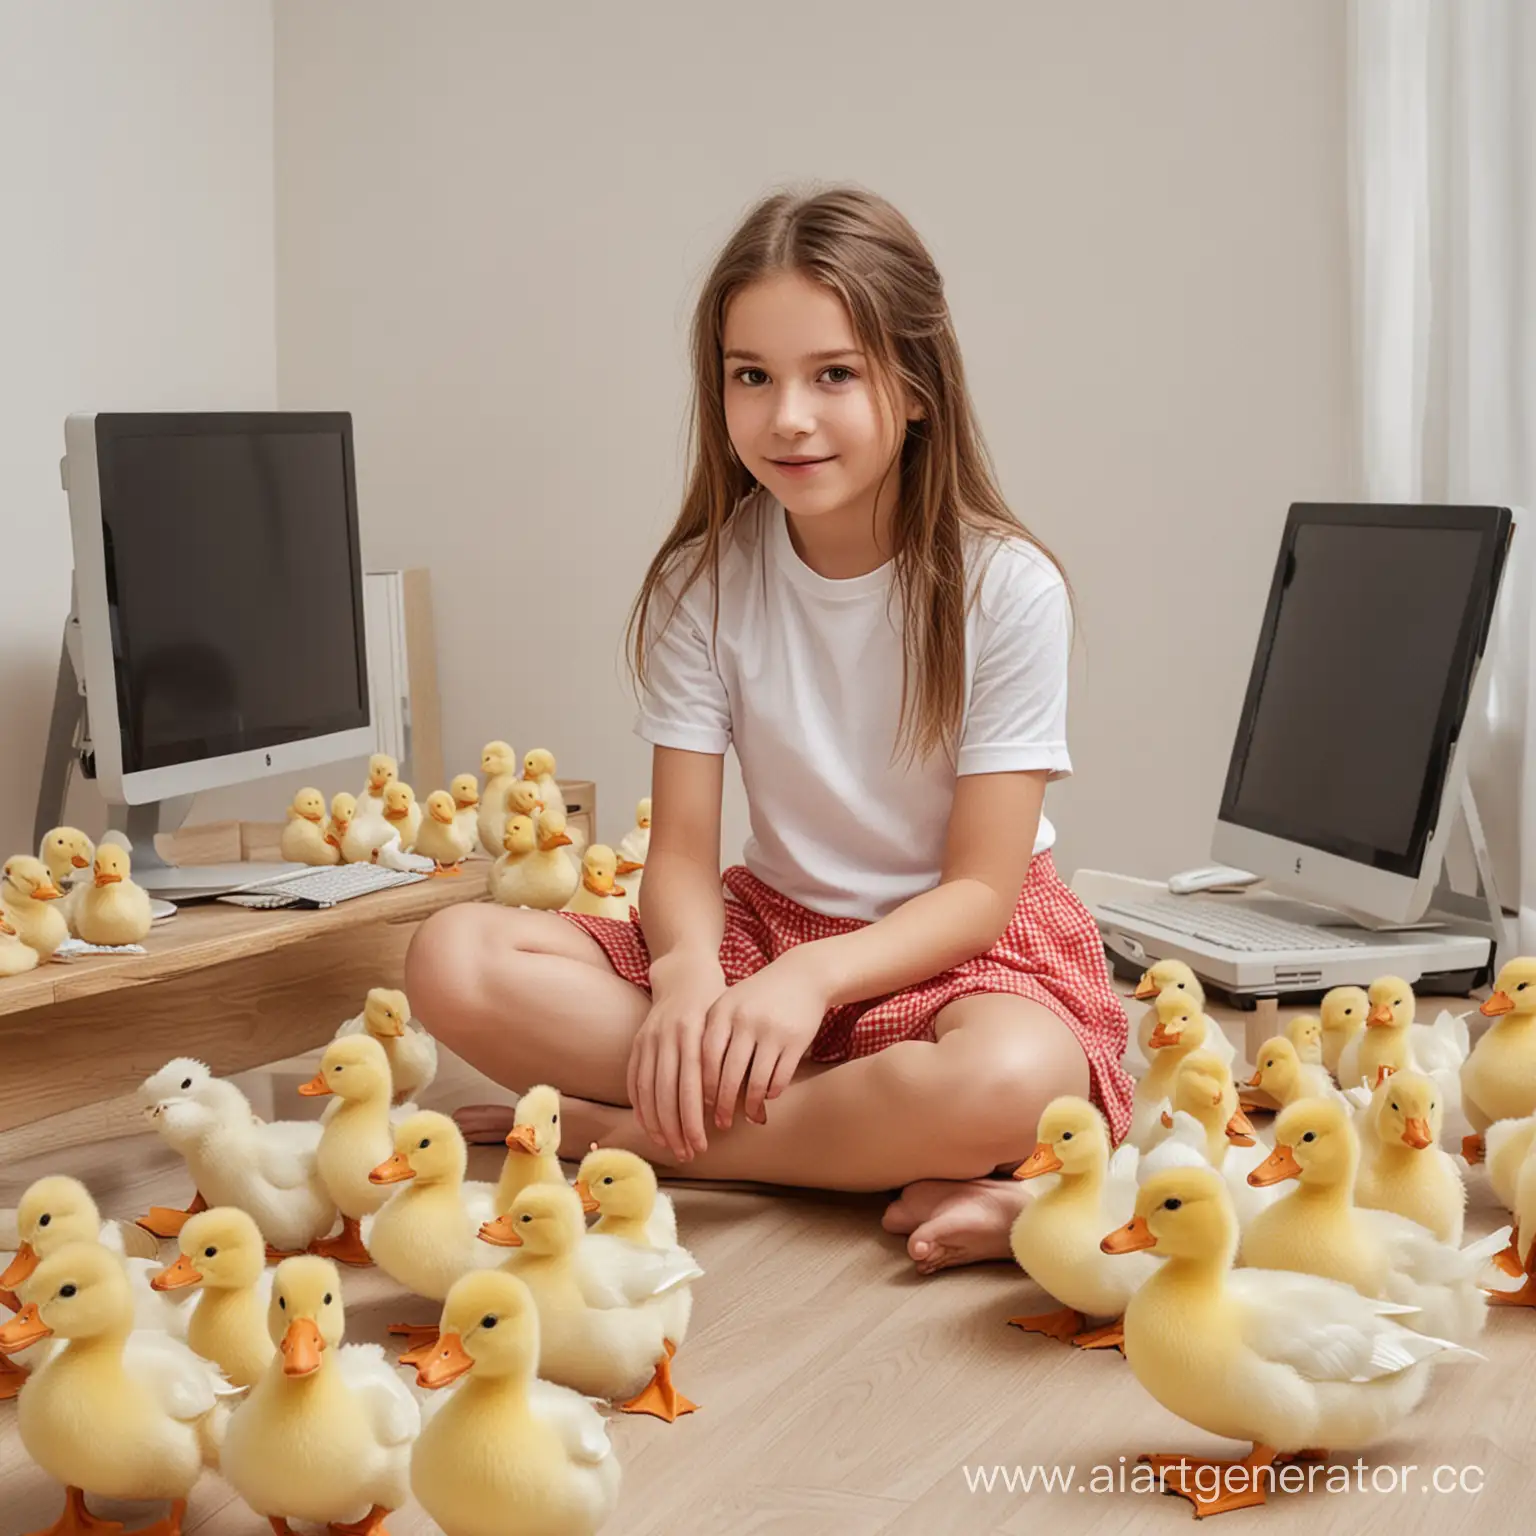 Girl-with-Adult-Ducks-at-Computer-Station